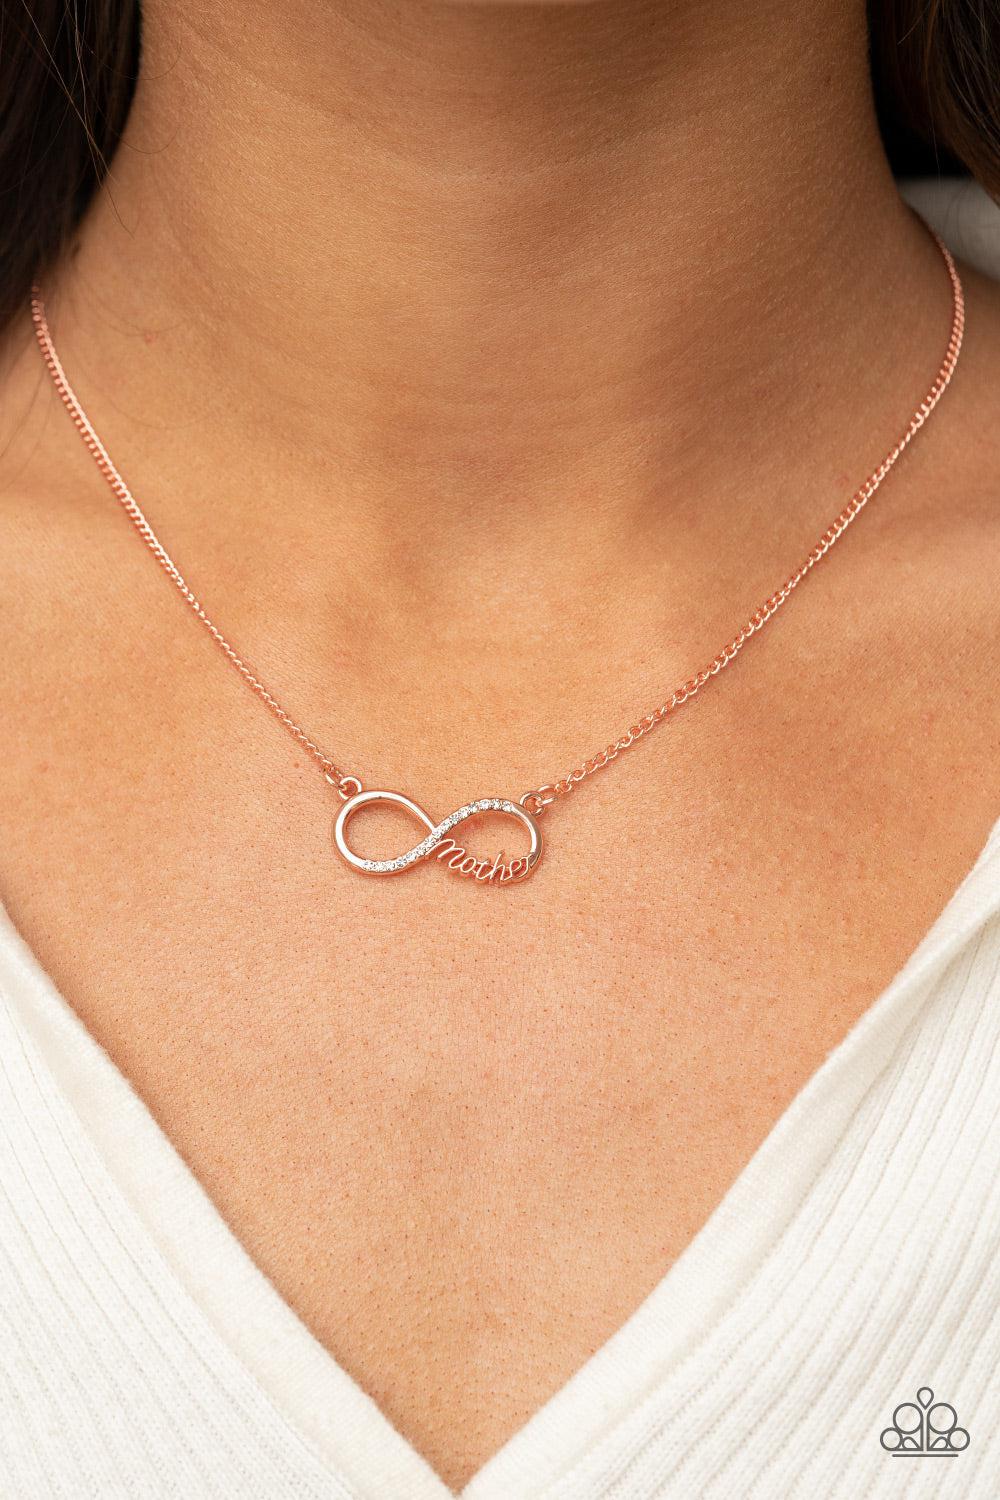 Forever Your Mom Copper Infinity Necklace - Paparazzi Accessories-on model - CarasShop.com - $5 Jewelry by Cara Jewels